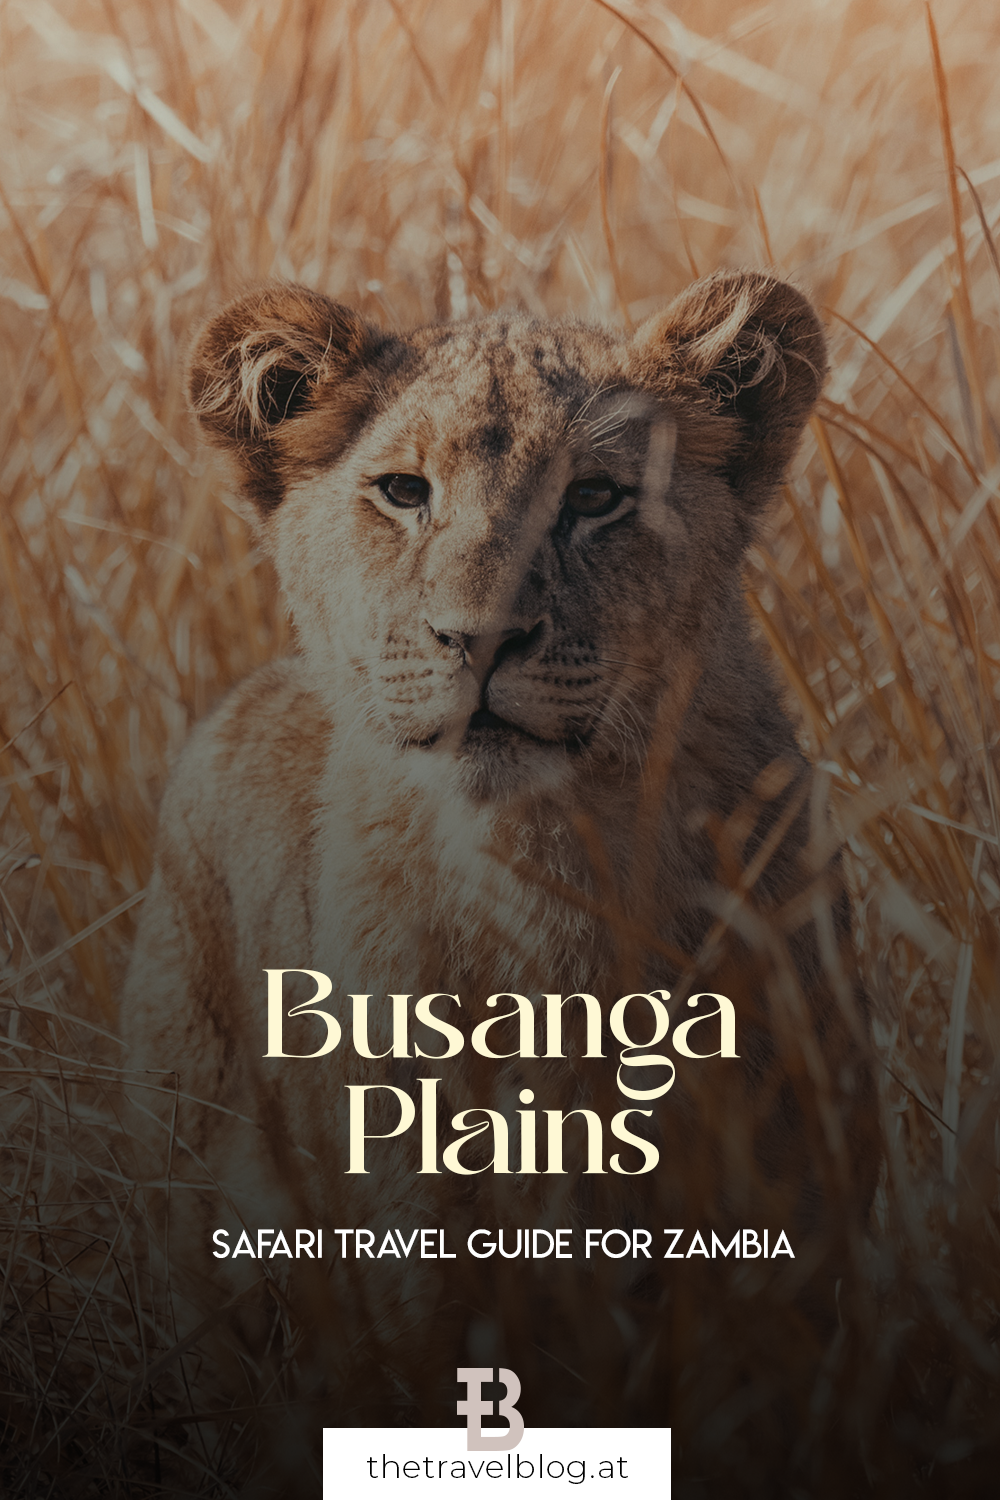 The pride of the Kafue National Park in Zambia: Busanga Plains safari guide by thetravelblog.at